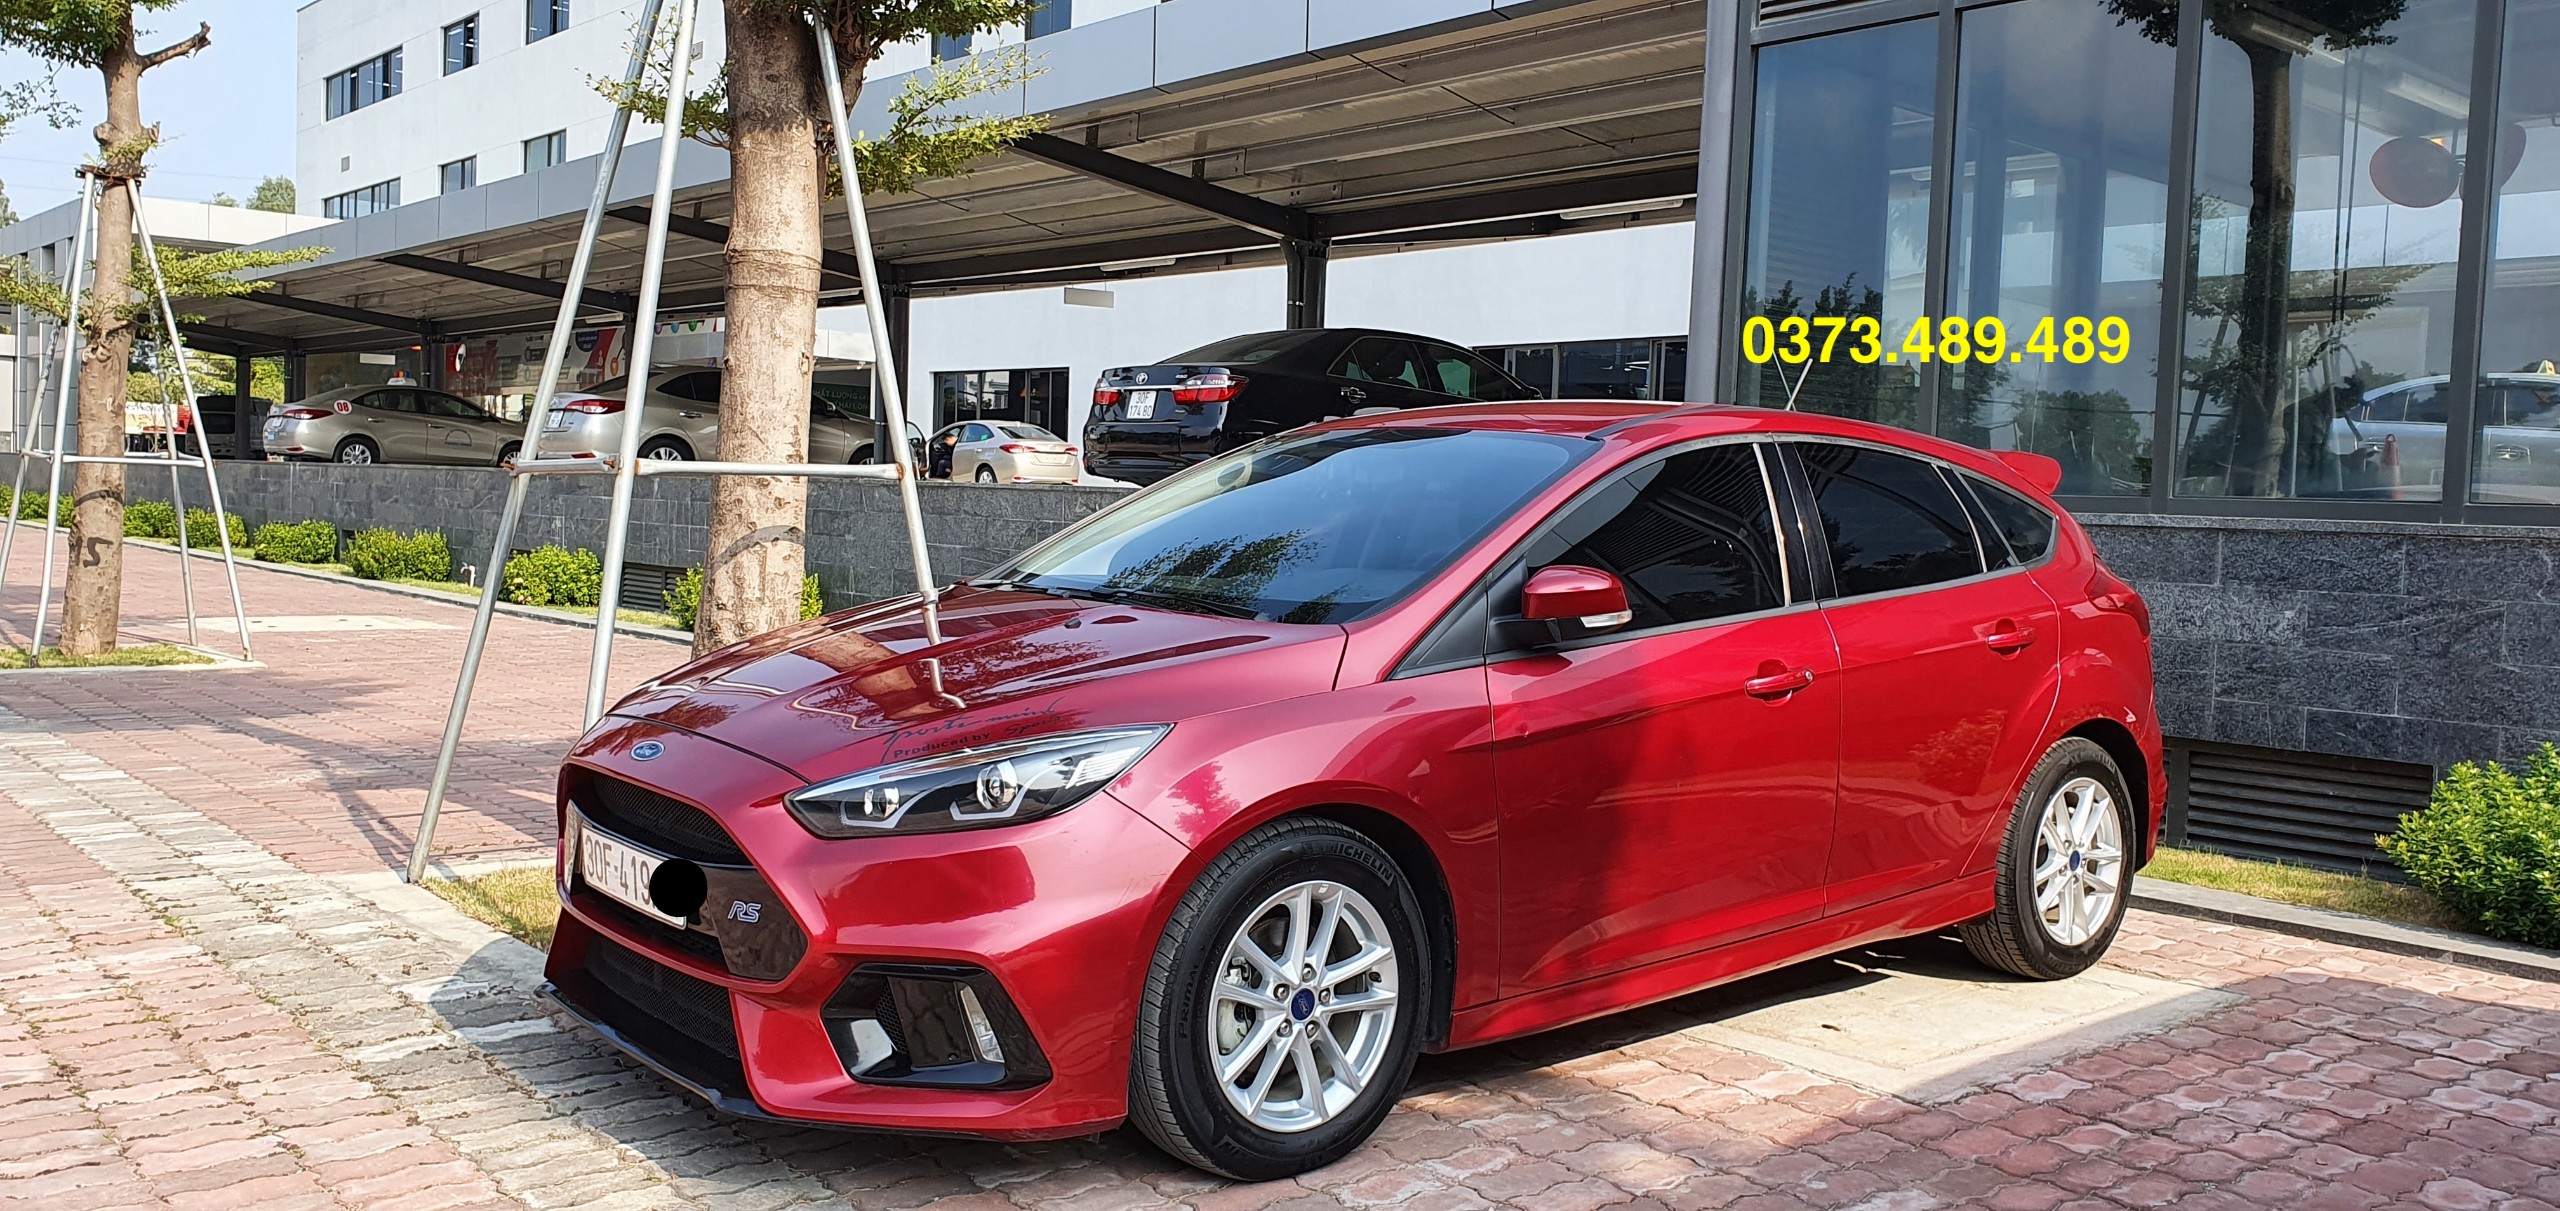 Ford Focus SE Hatchback 2018 Price In Europe  Features And Specs   Ccarprice EUR